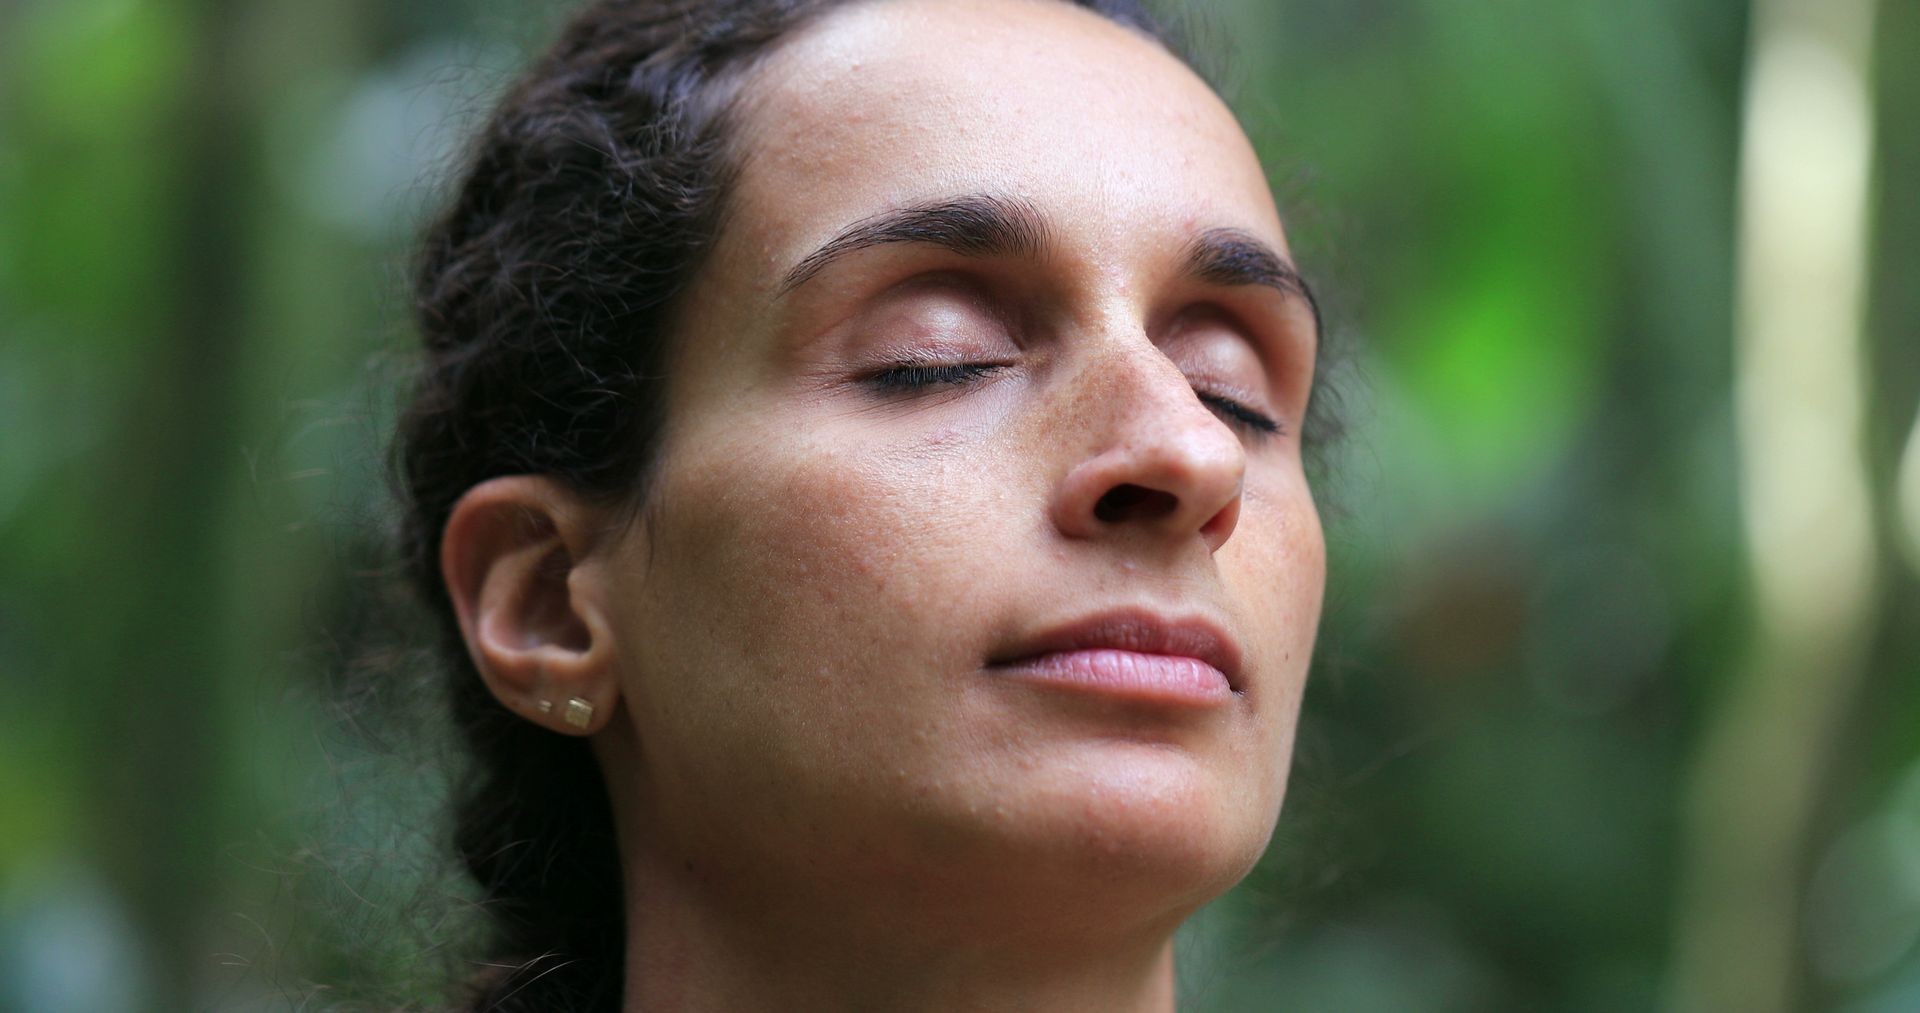 Woman meditating outdoors, taking a deep breath with eyes closed